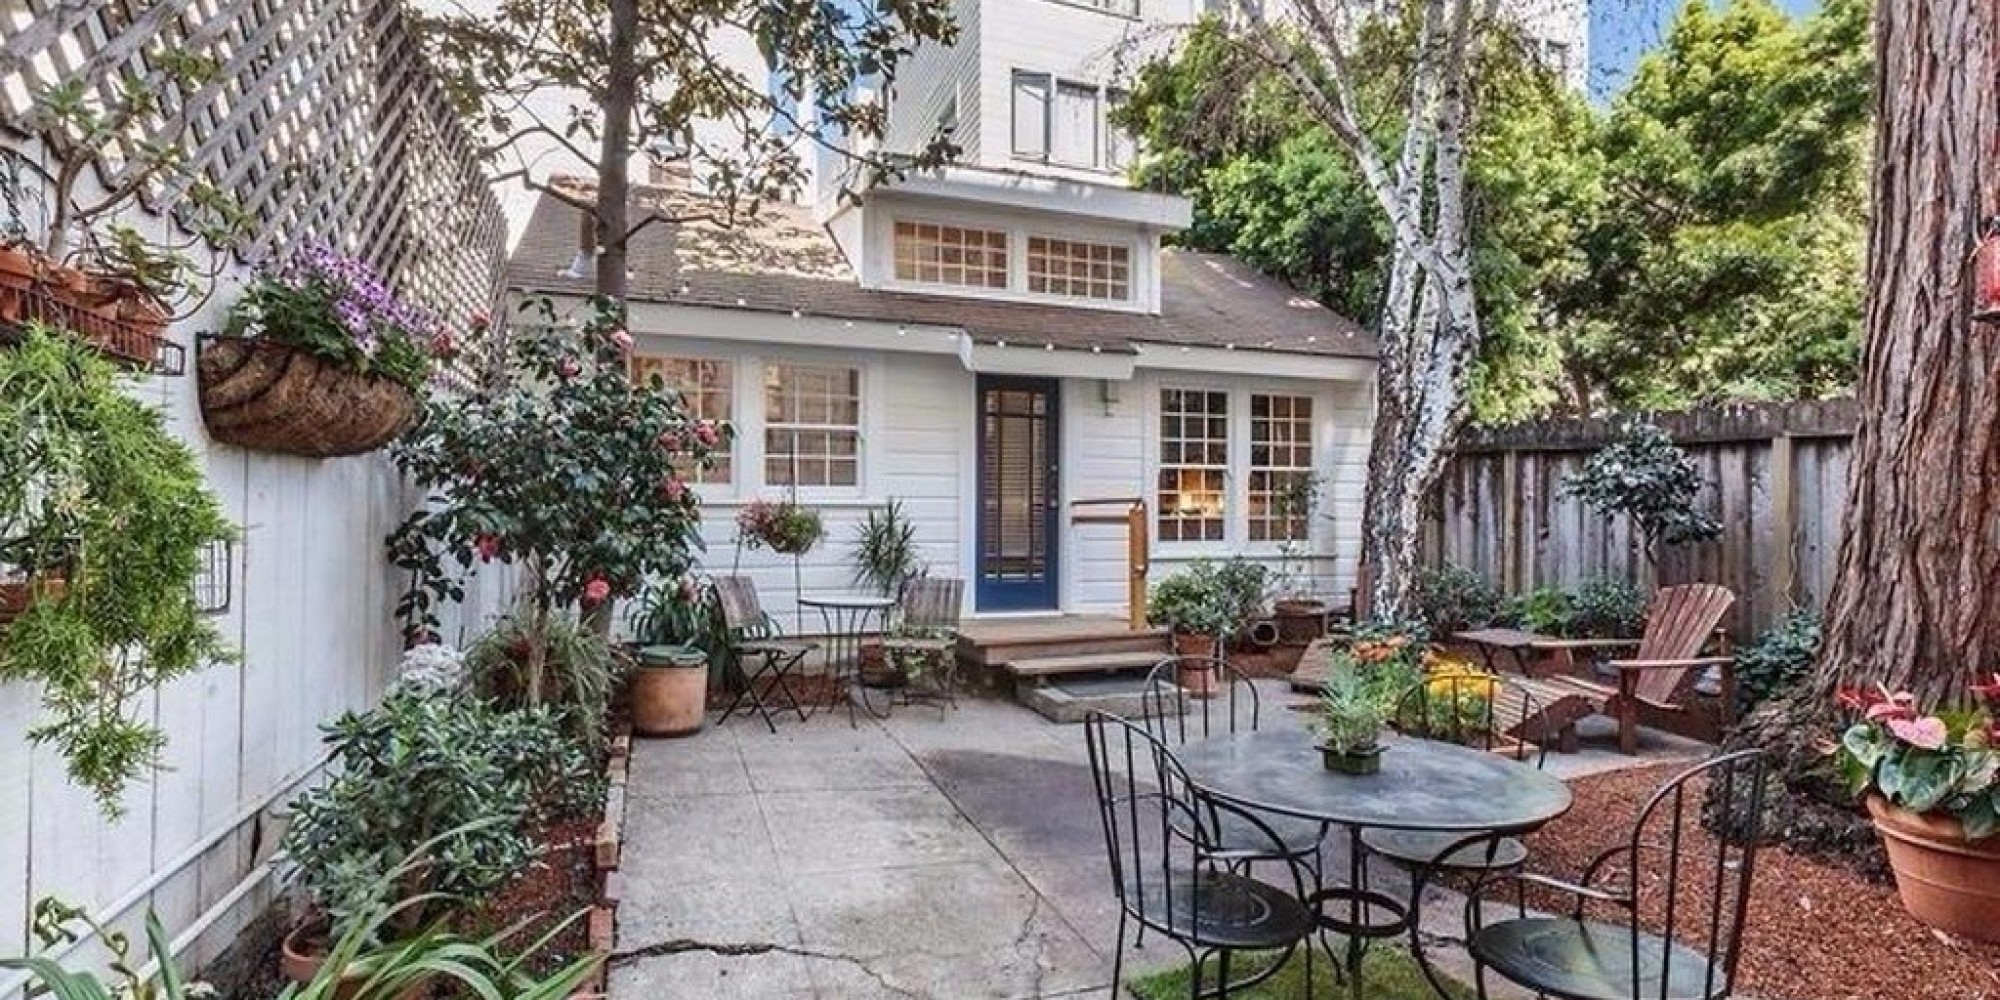 San Francisco #39 s Tiniest Home Listing Sells For An Arm And A Leg